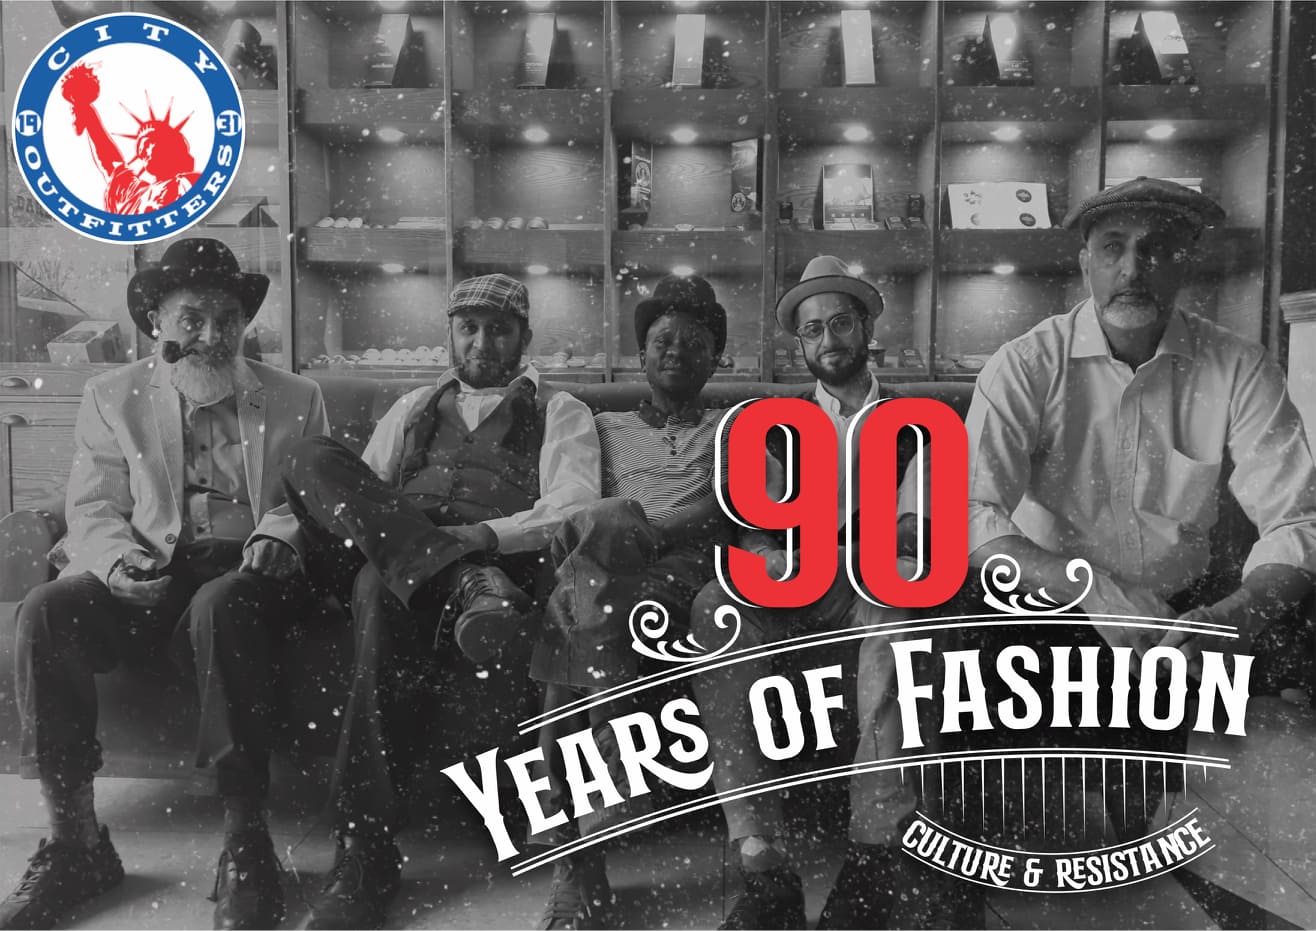 90 Years Of Fashion, Culture and Resistance